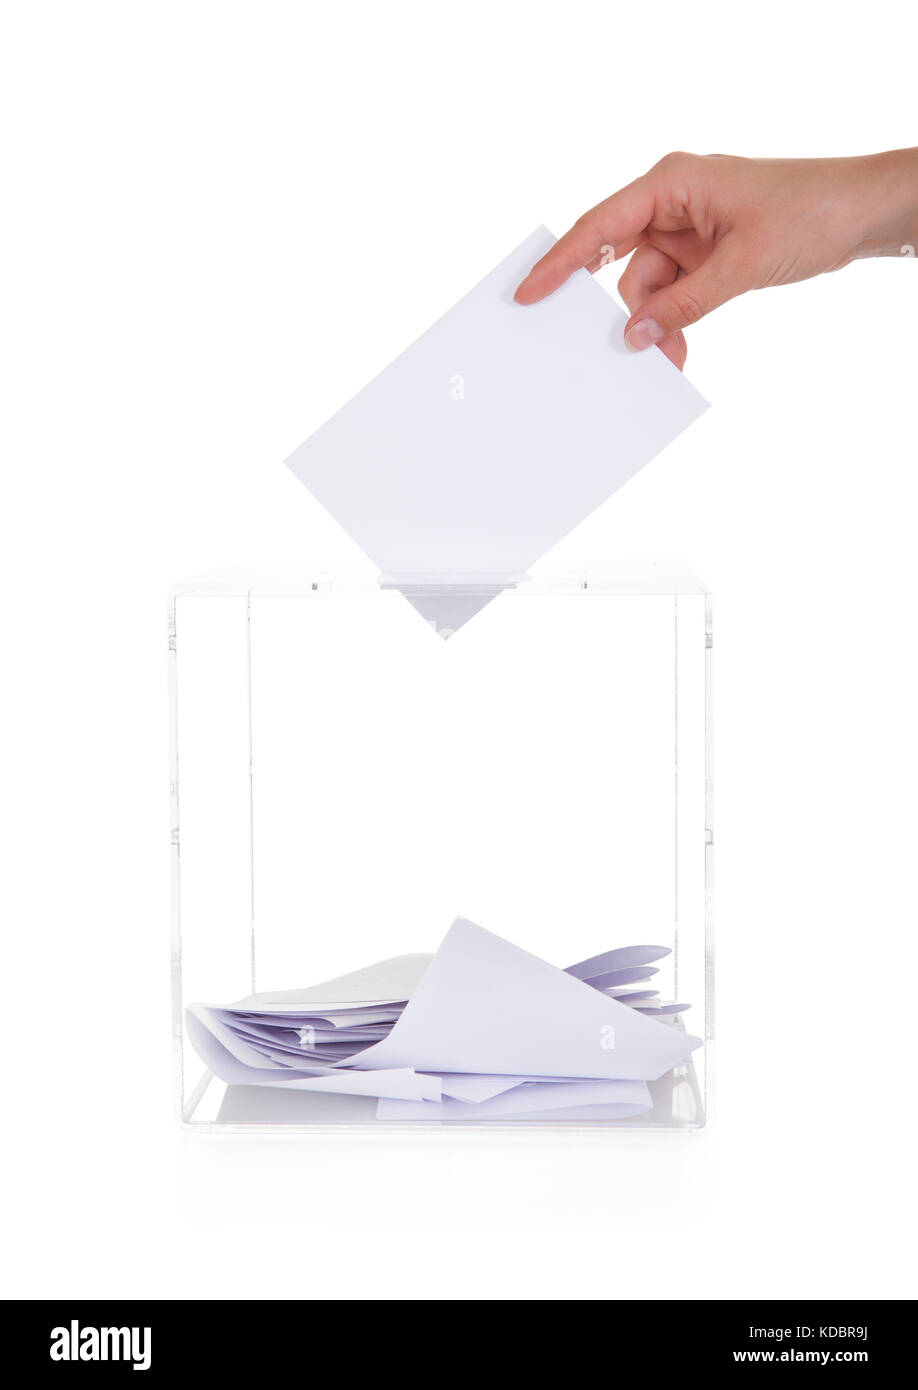 Closeup Of Hand Inserting Ballot In Box Over White Background Stock Photo